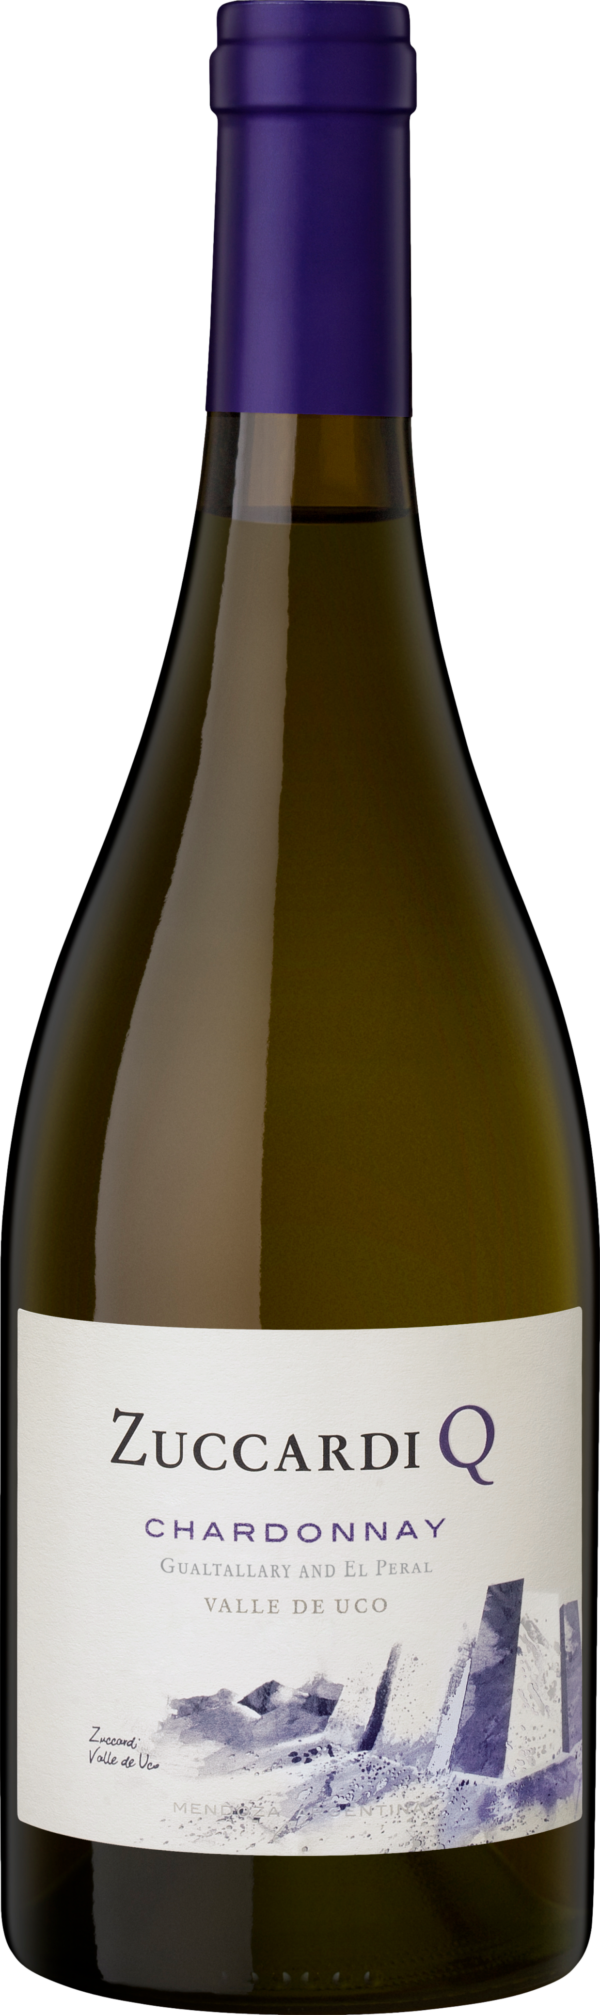 Product image of Zuccardi Serie Q Chardonnay 2021 from 8wines